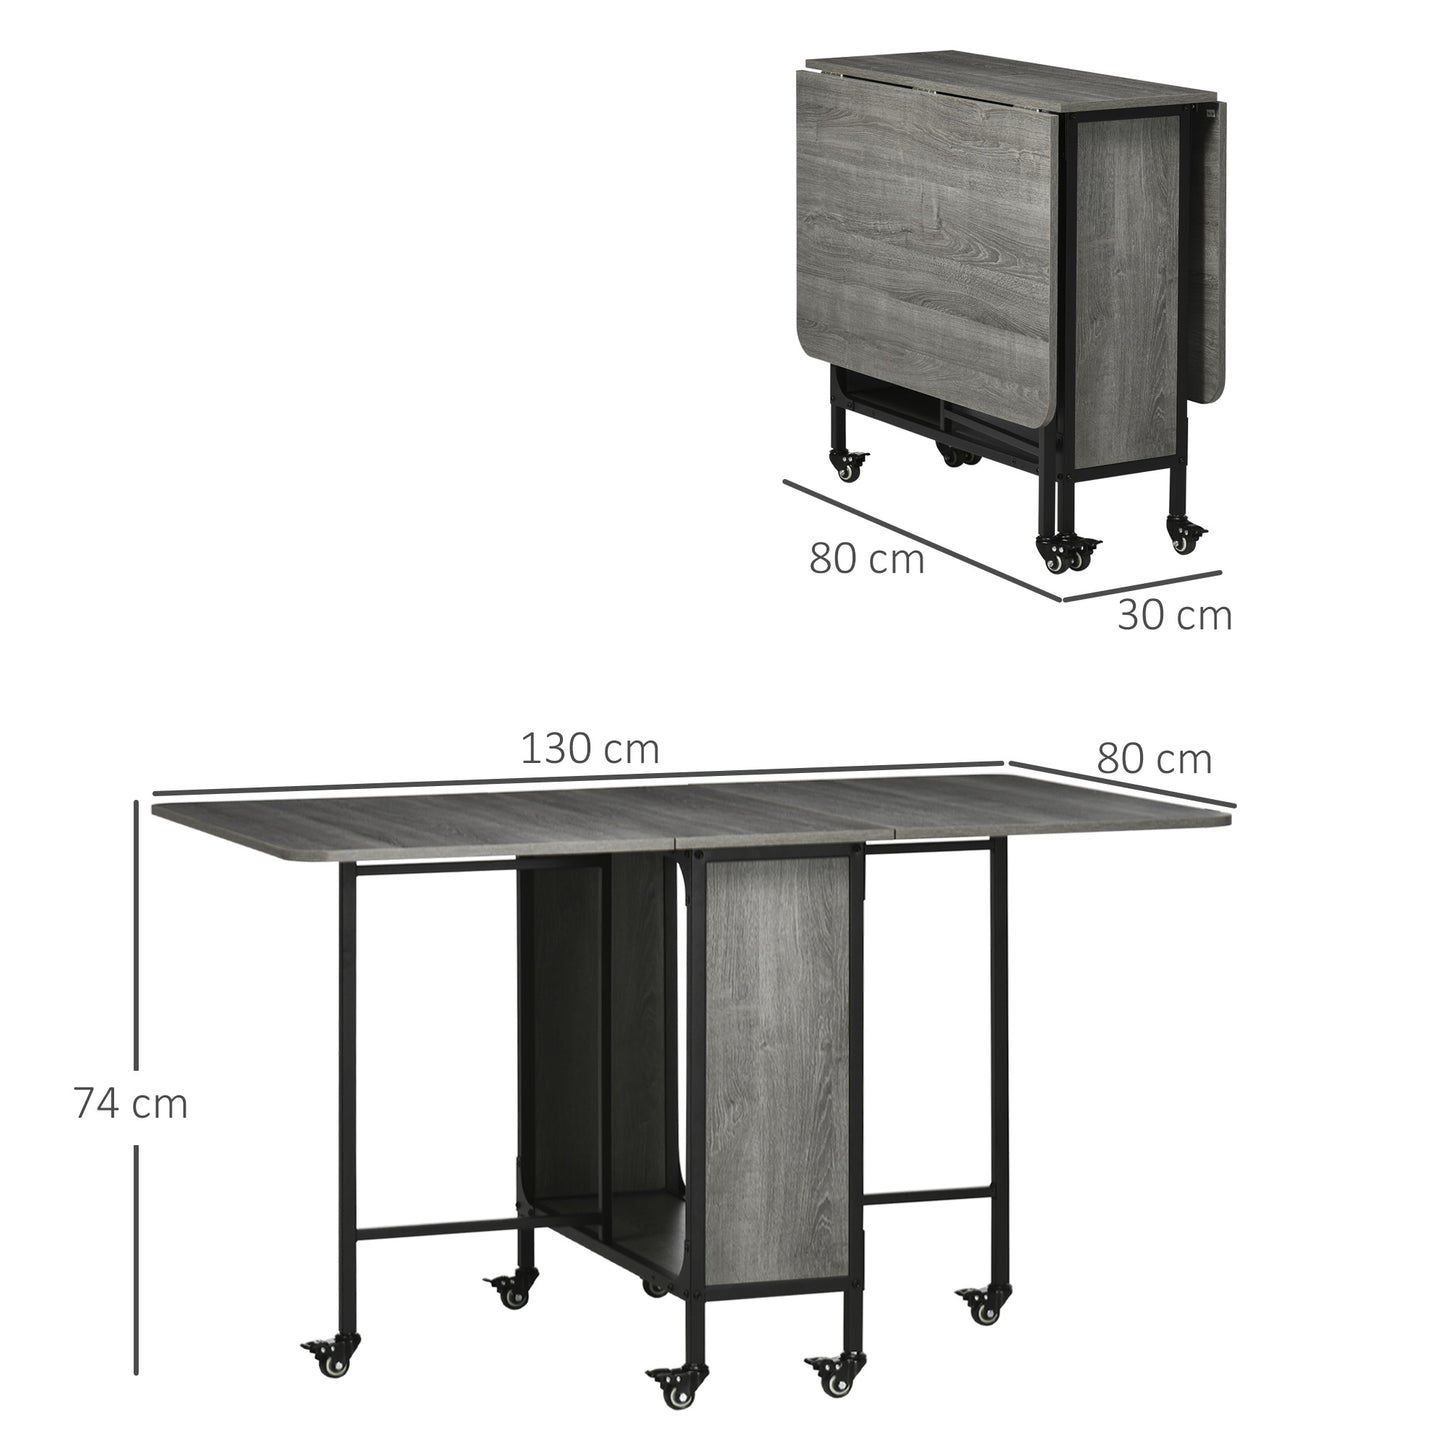 HOMCOM Mobile Drop Leaf Table Folding Kitchen Table Extendable Dining Table For Small Spaces With 6 Wheels & Storage Shelf